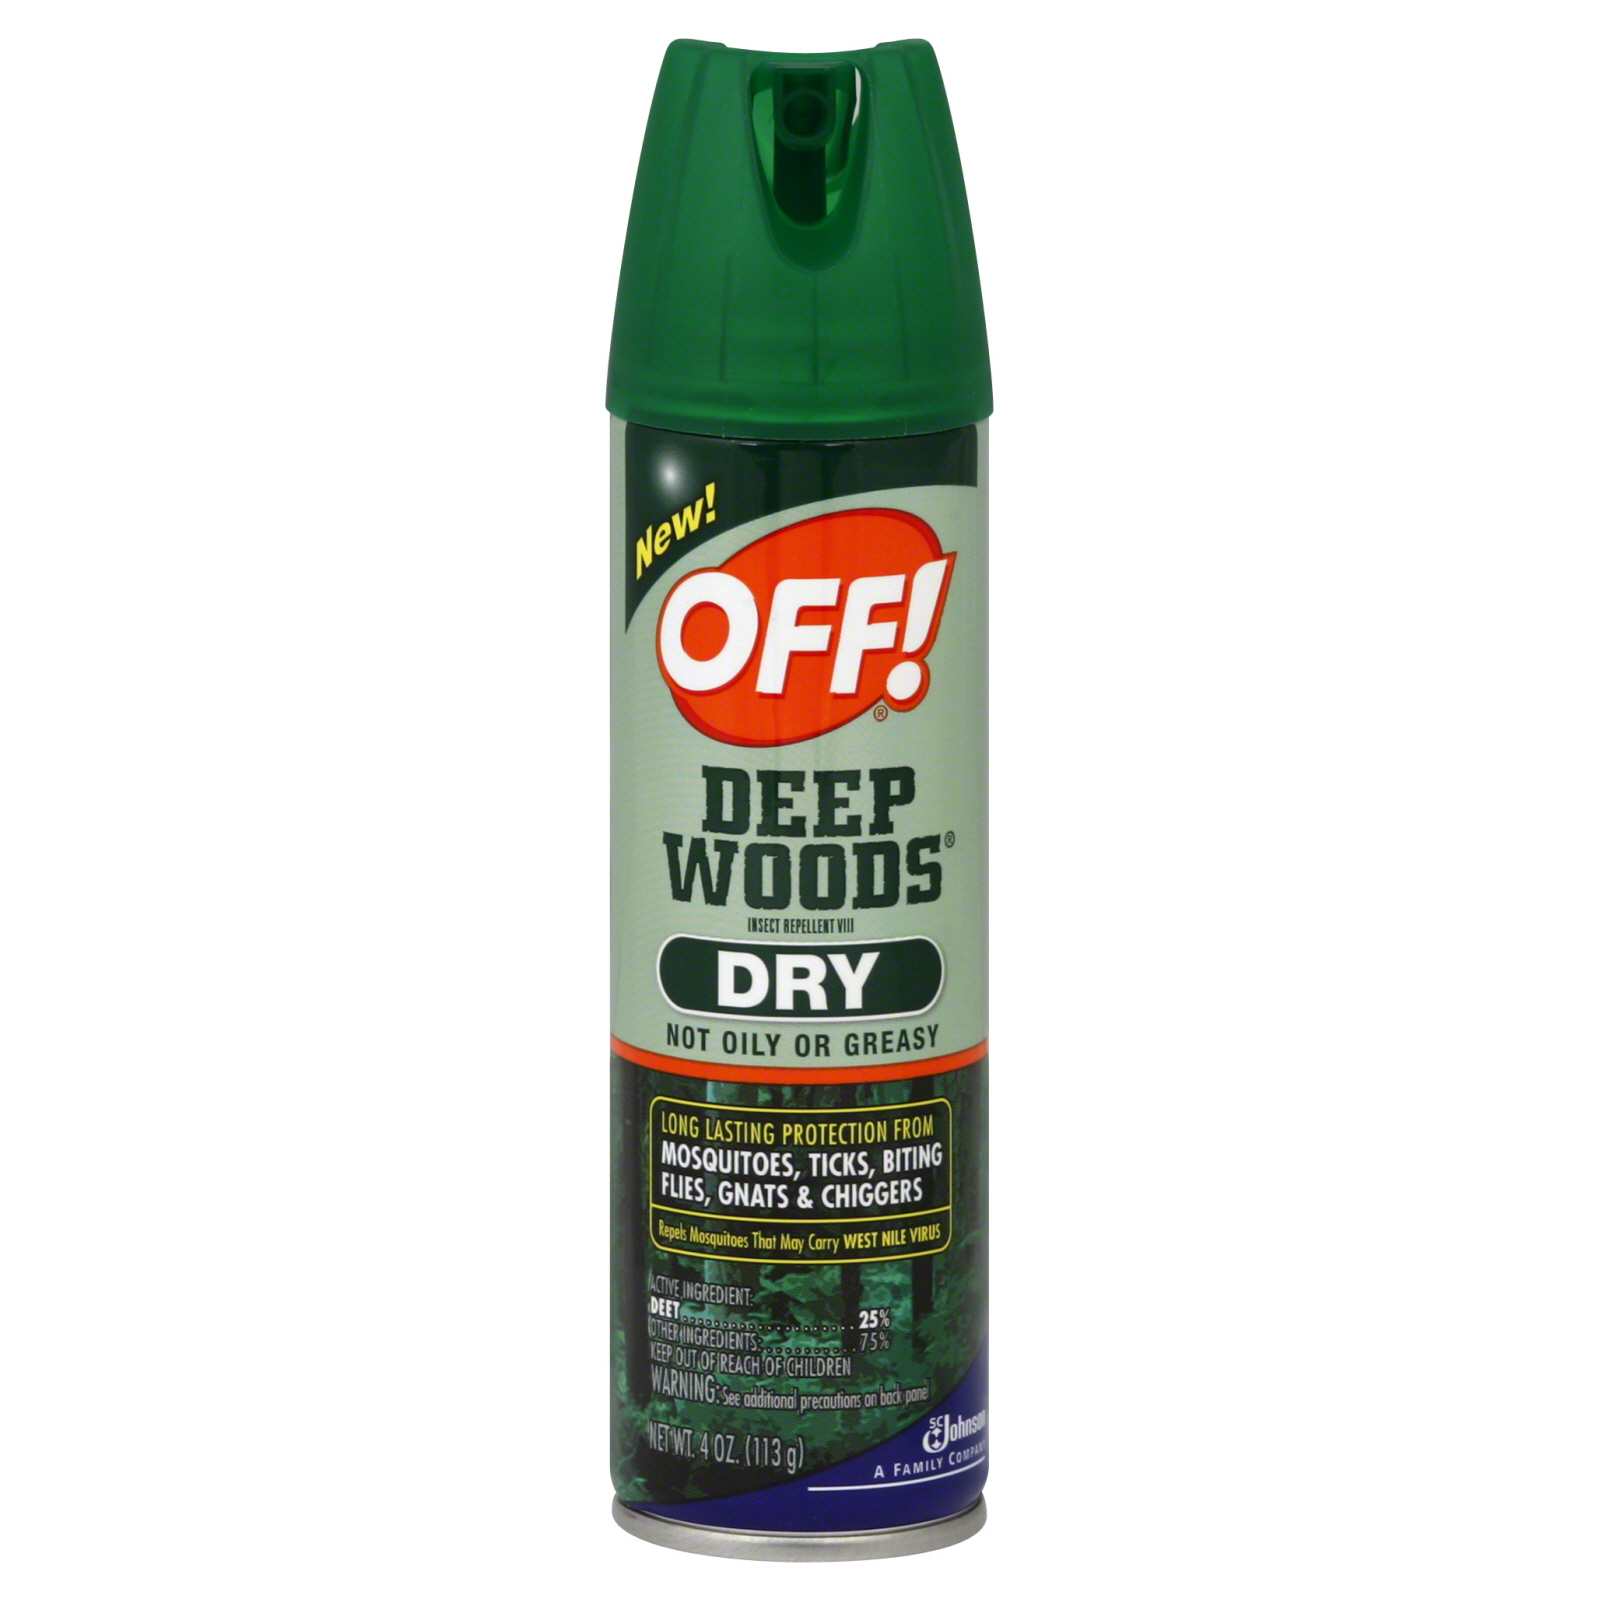 Off! 4 oz. Deep Woods Dry Insect Repellent Spray